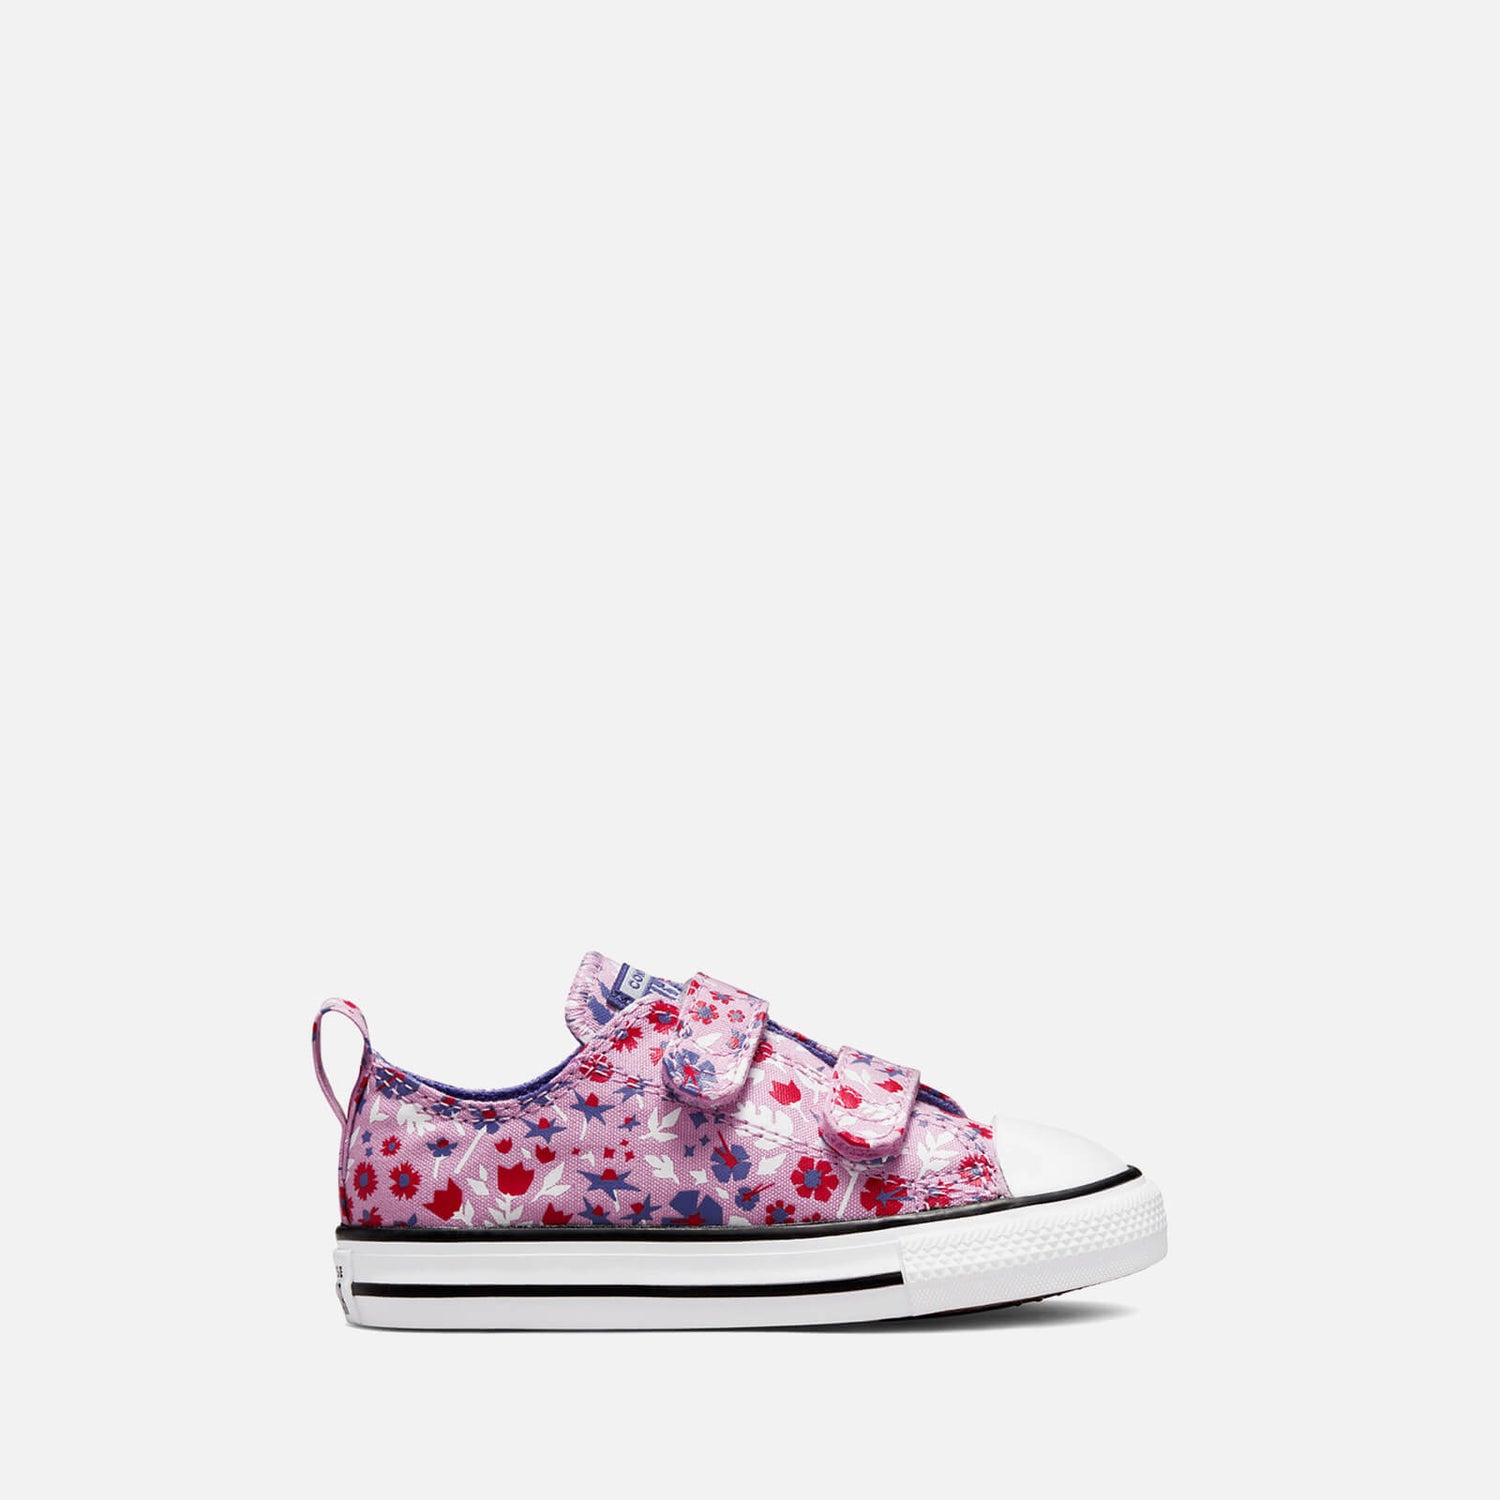 Converse Toddlers' Chuck Taylor All Star 2V Paper Floral Print Trainers - Beyond Pink/Washed Indigo - UK 4 Baby